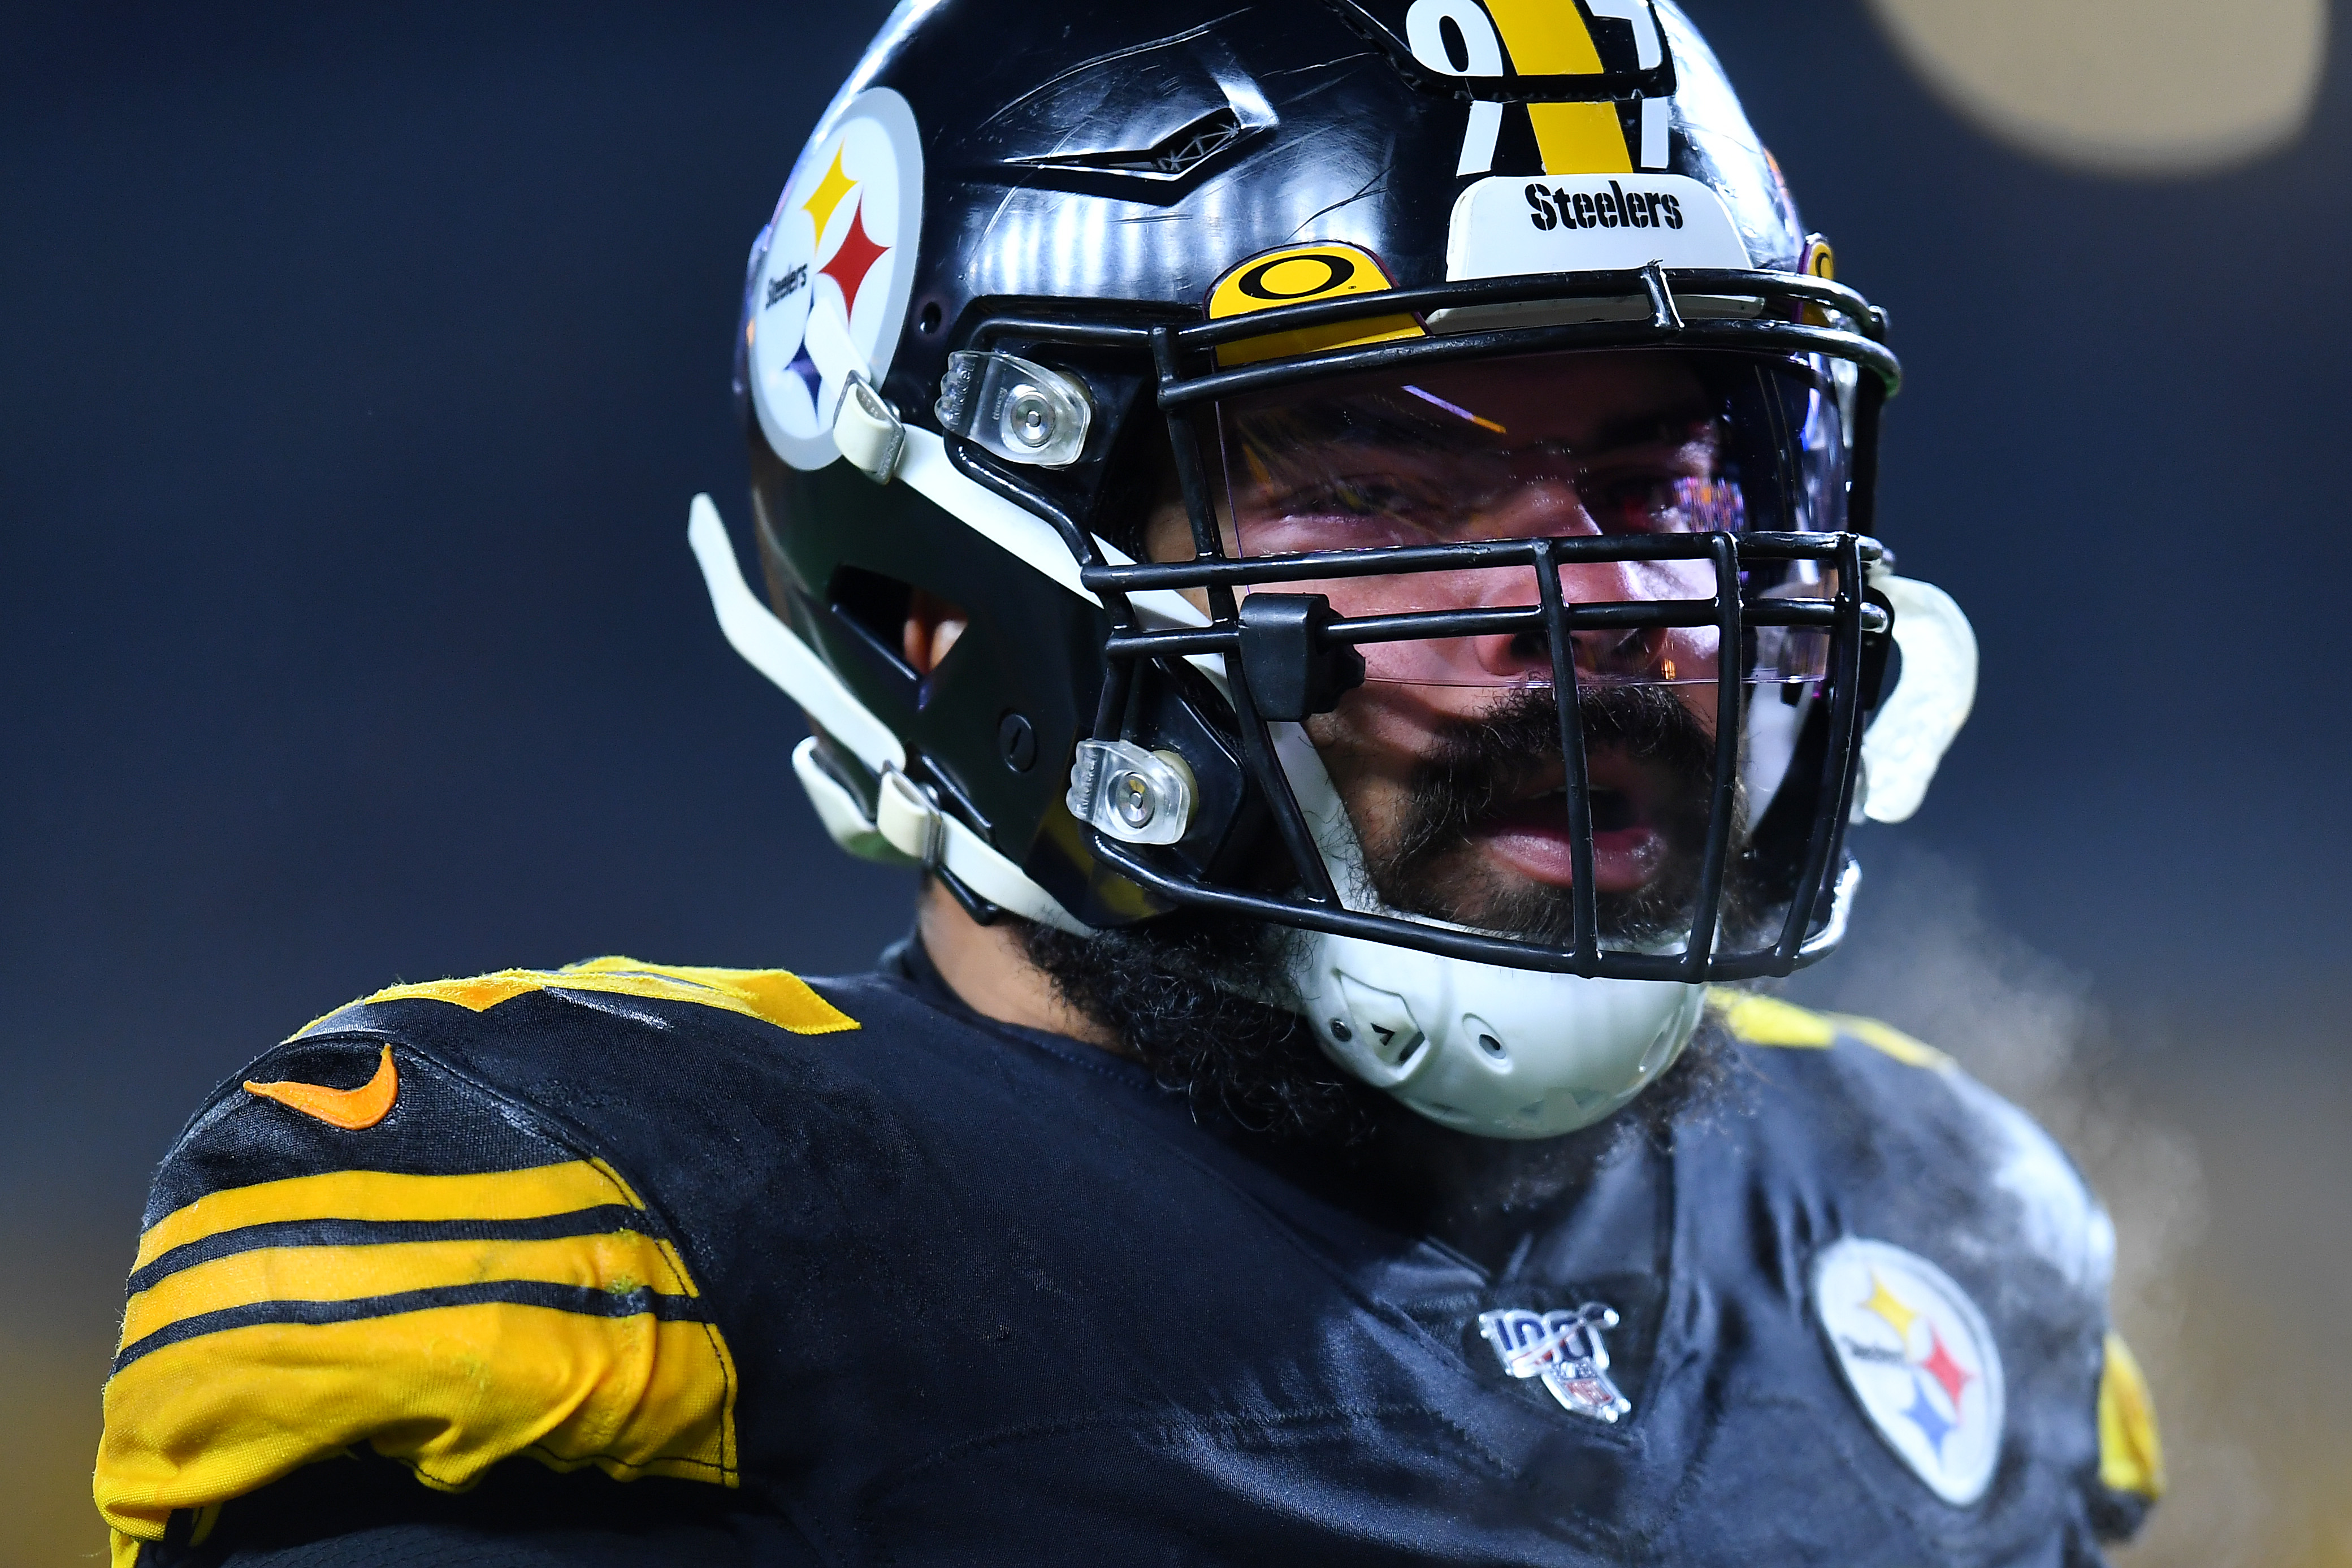 Steelers defensive tackle Cameron Heyward in action during a game